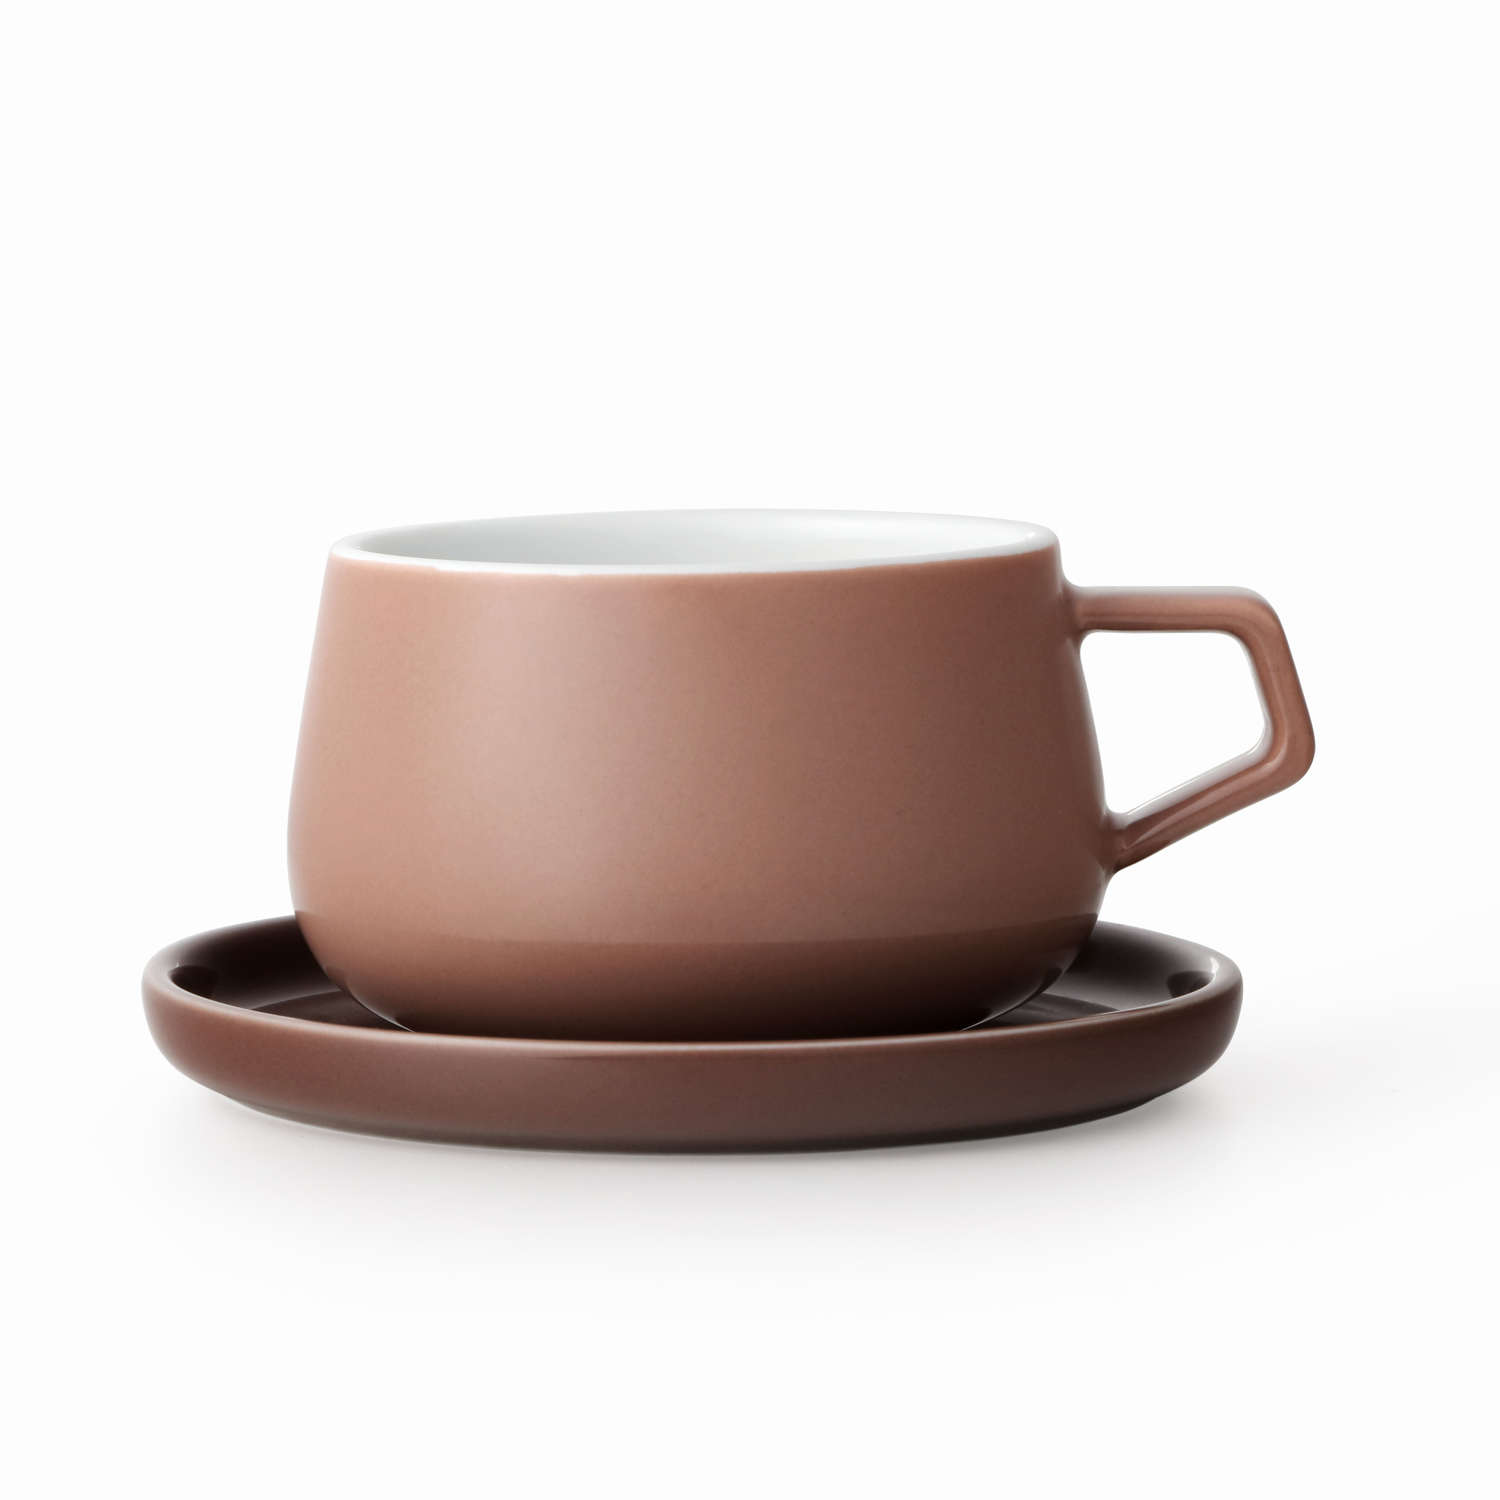 Powder brown and white porcelain cup and saucer